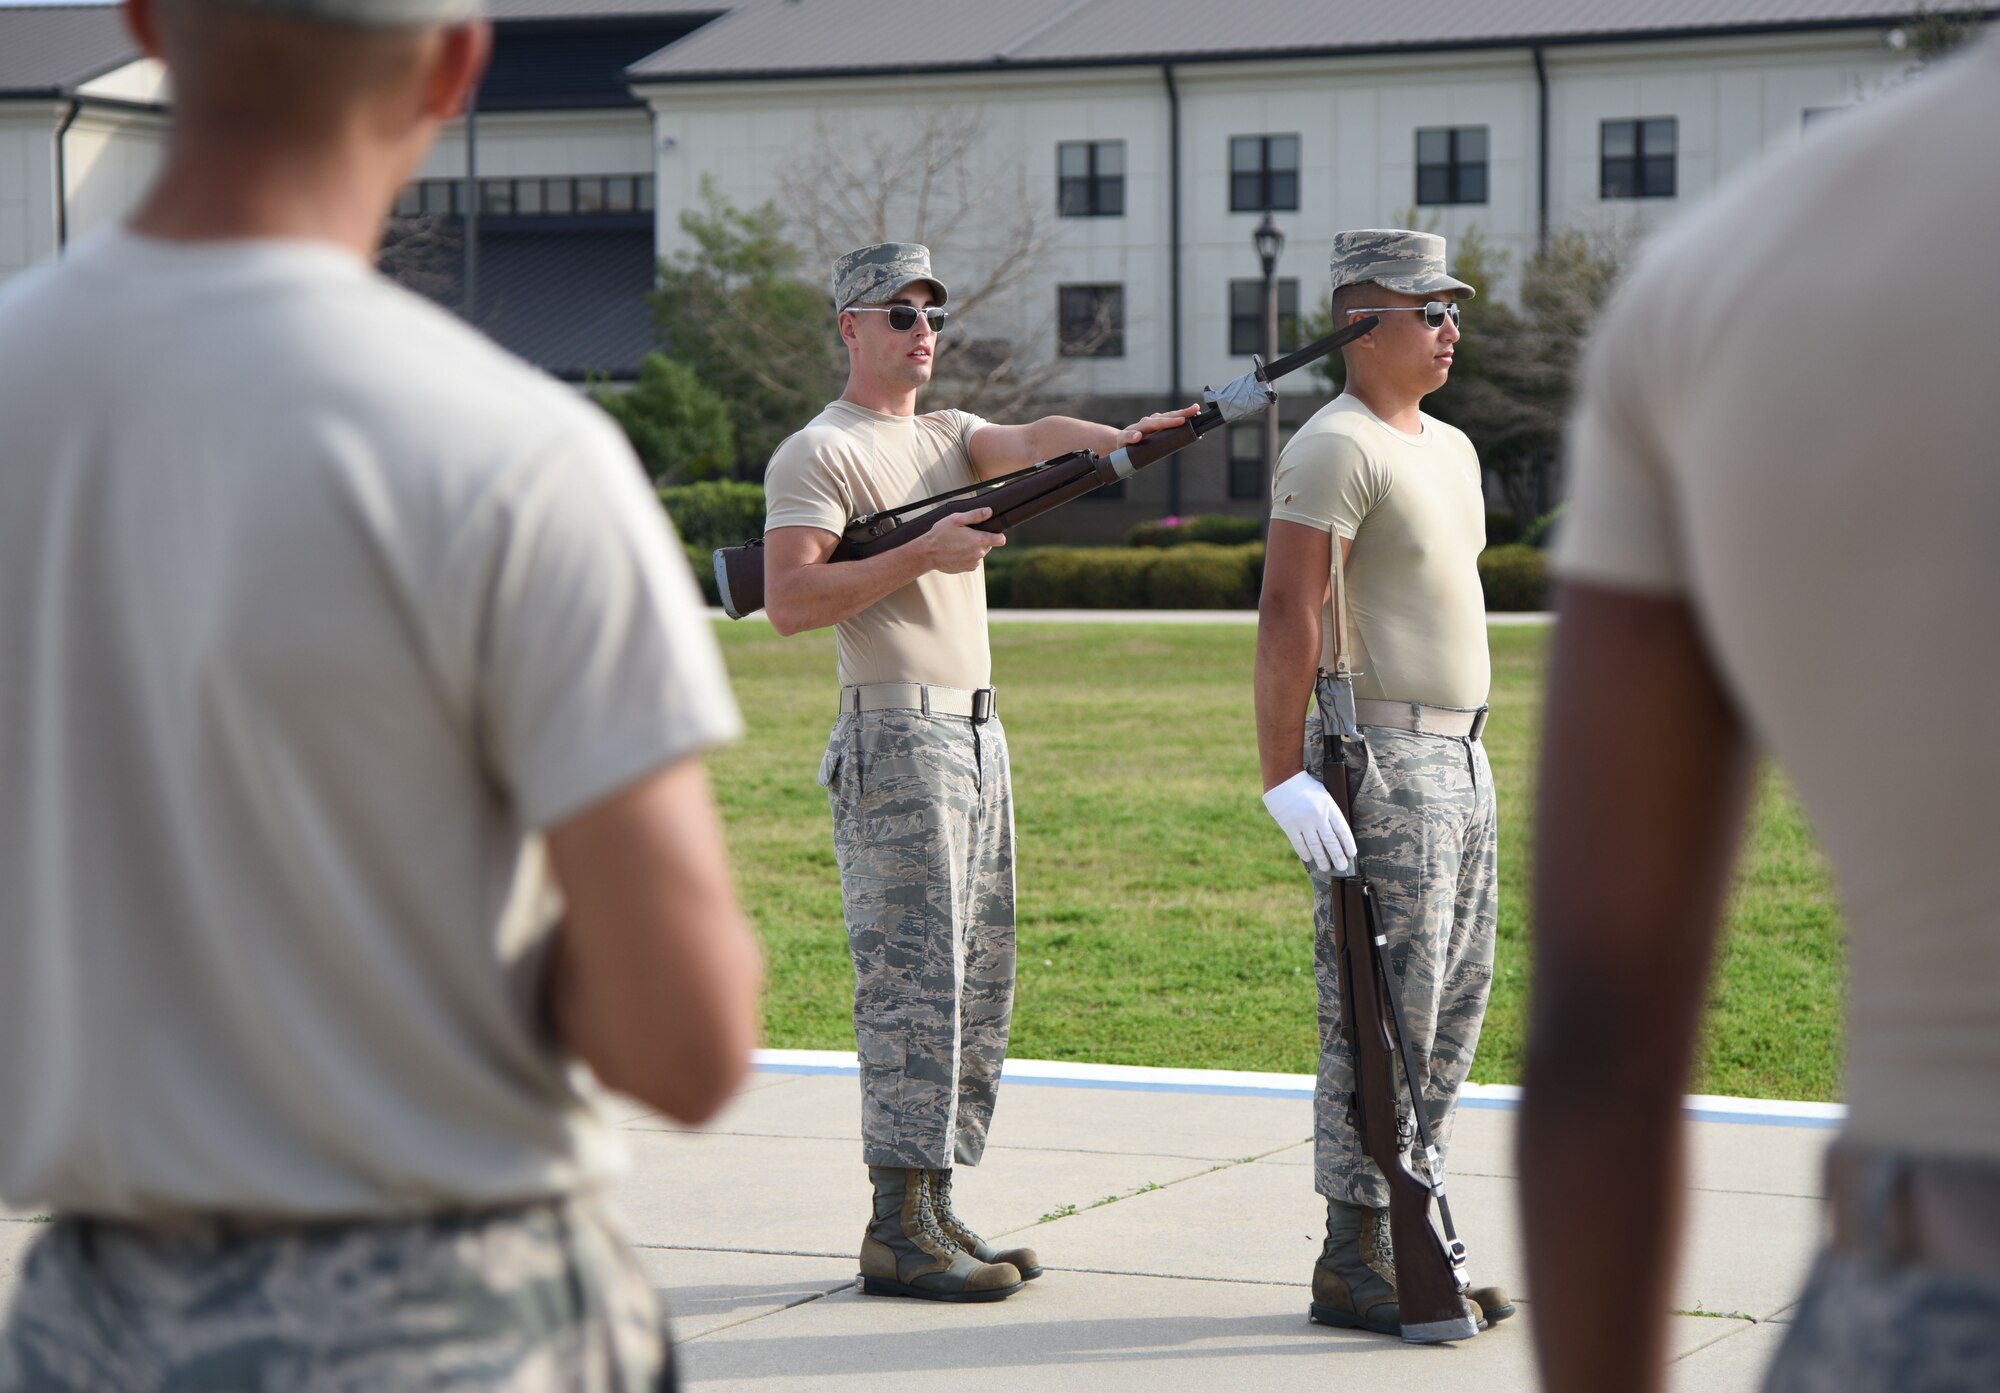 Senior Airman Larry Brown, U.S. Air Force Honor Guard Drill Team member, provides instruction during the practice of a new routine on the Levitow Training Support Facility drill pad Feb. 14, 2017, on Keesler Air Force Base, Miss. The team comes to Keesler every year for five weeks to develop a new routine, which is then revealed during an 81st Training Group drill down competition. The team preforms the routine used throughout the year. (U.S. Air Force photo by Kemberly Groue)